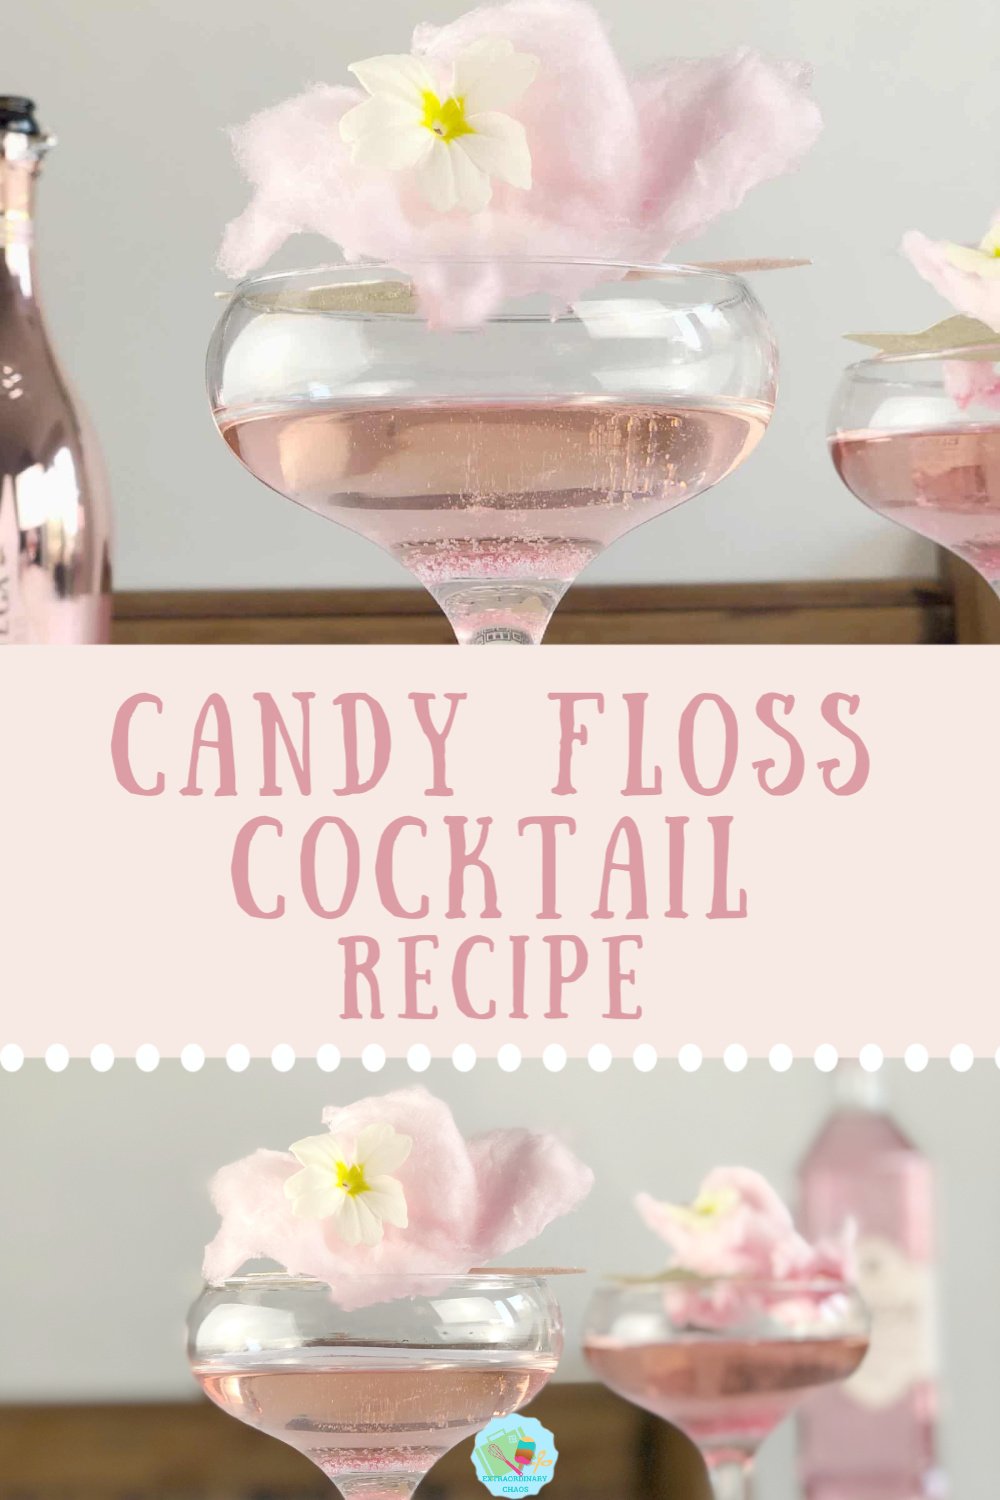 How to make a cocktail with candy floss